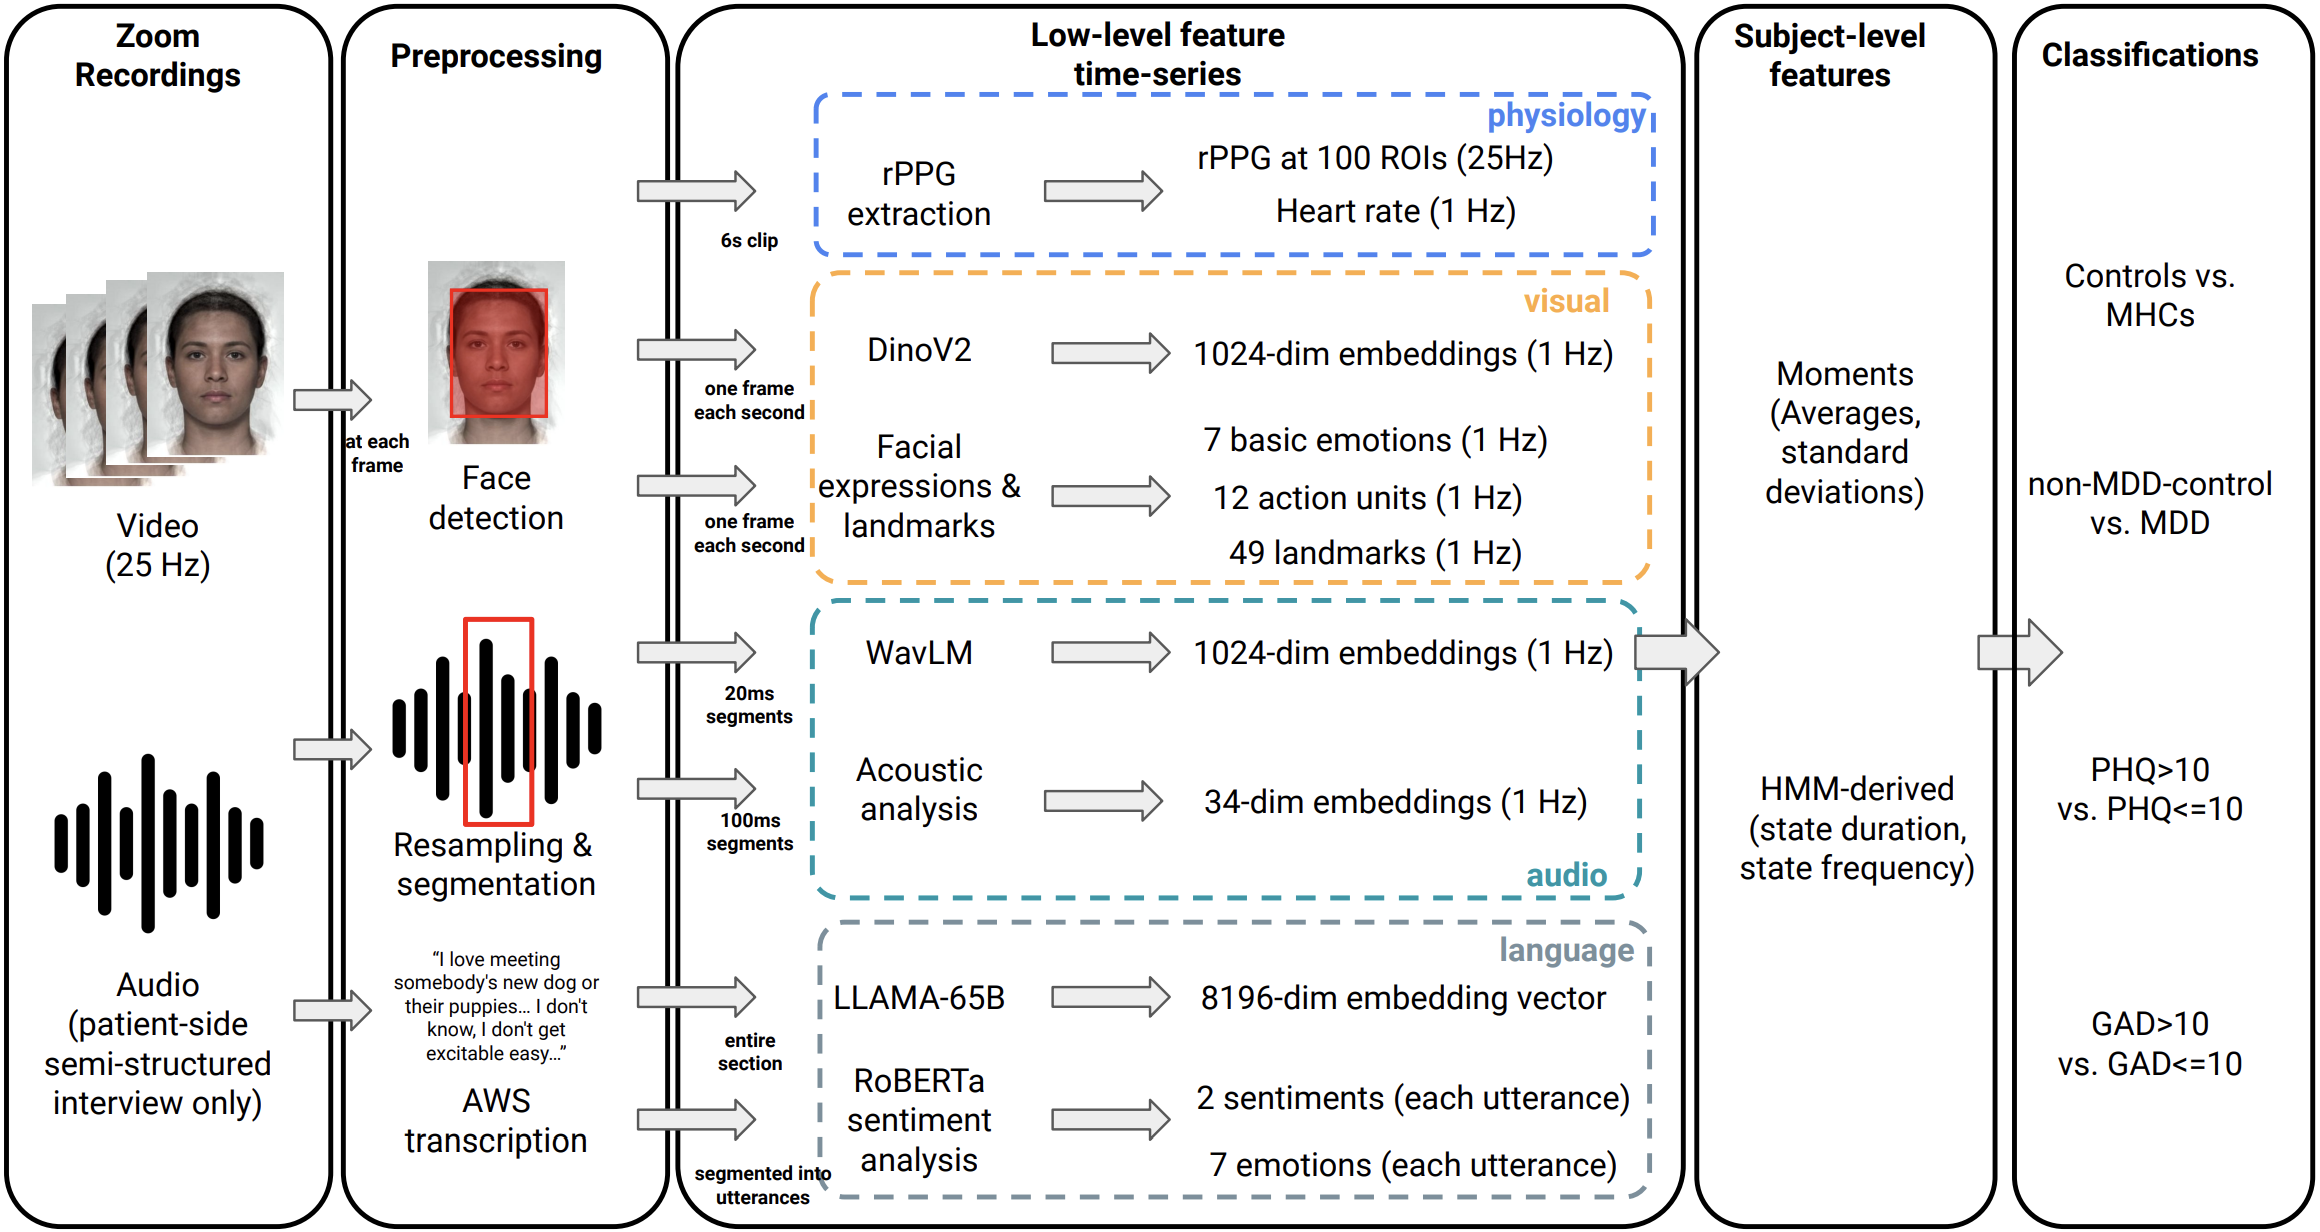 Multimodal Mental Health Digital Biomarker Analysis From Remote Interviews Using Facial, Vocal, Linguistic, and Cardiovascular Patterns